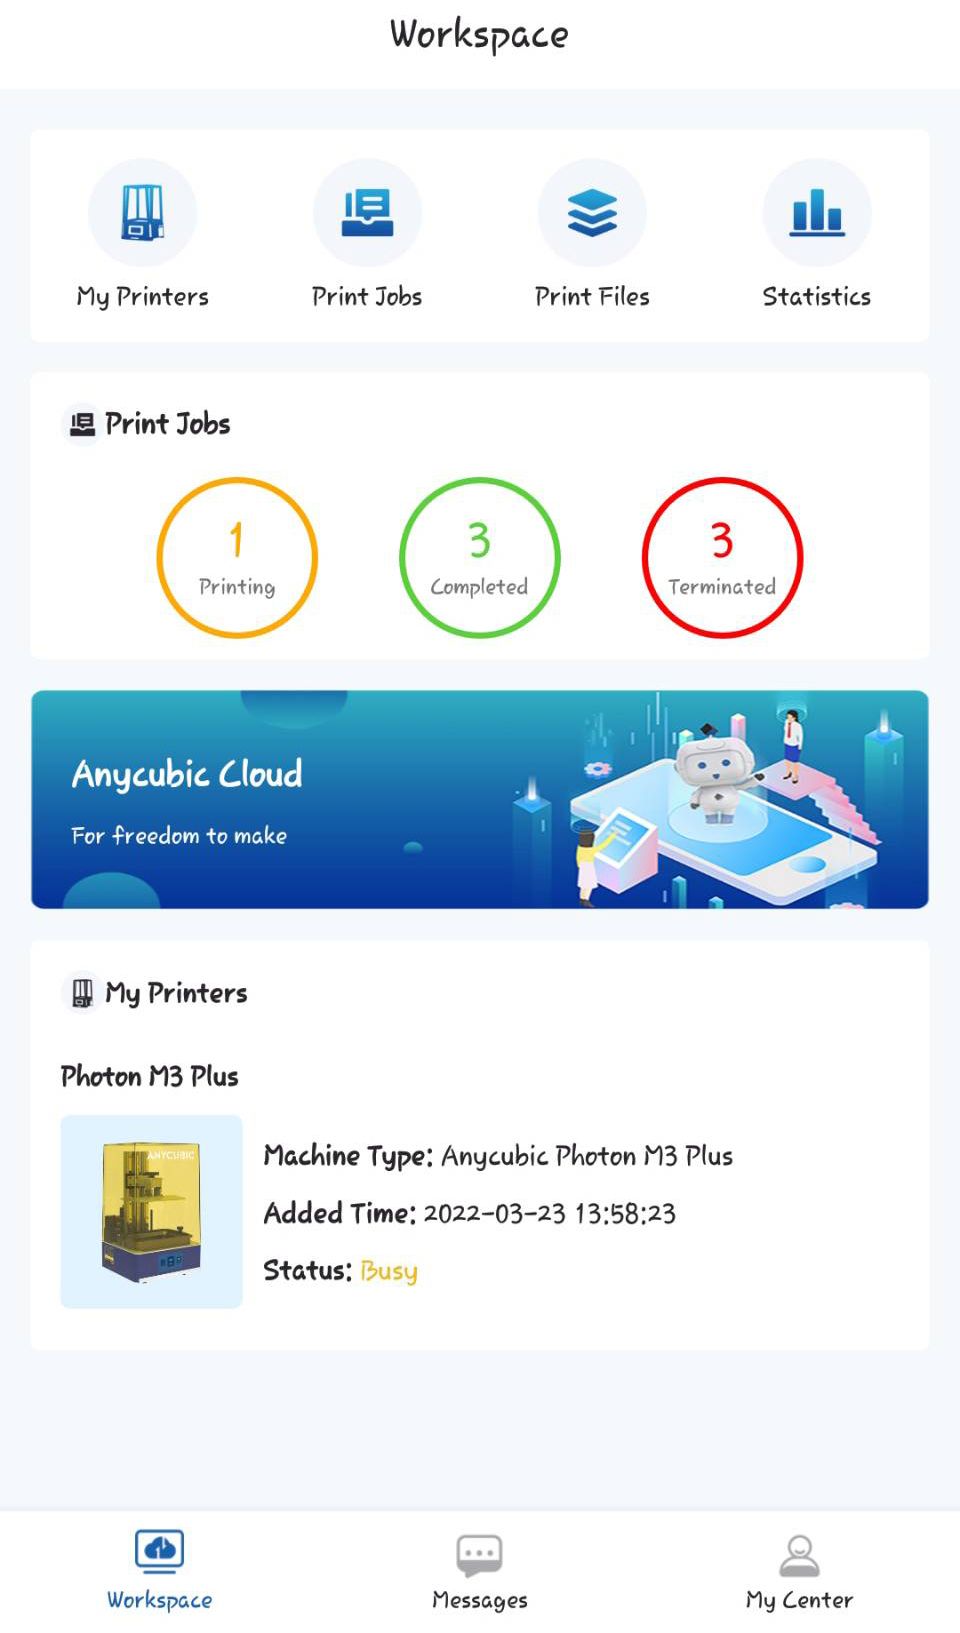 Anycubic Cloud Workspace view